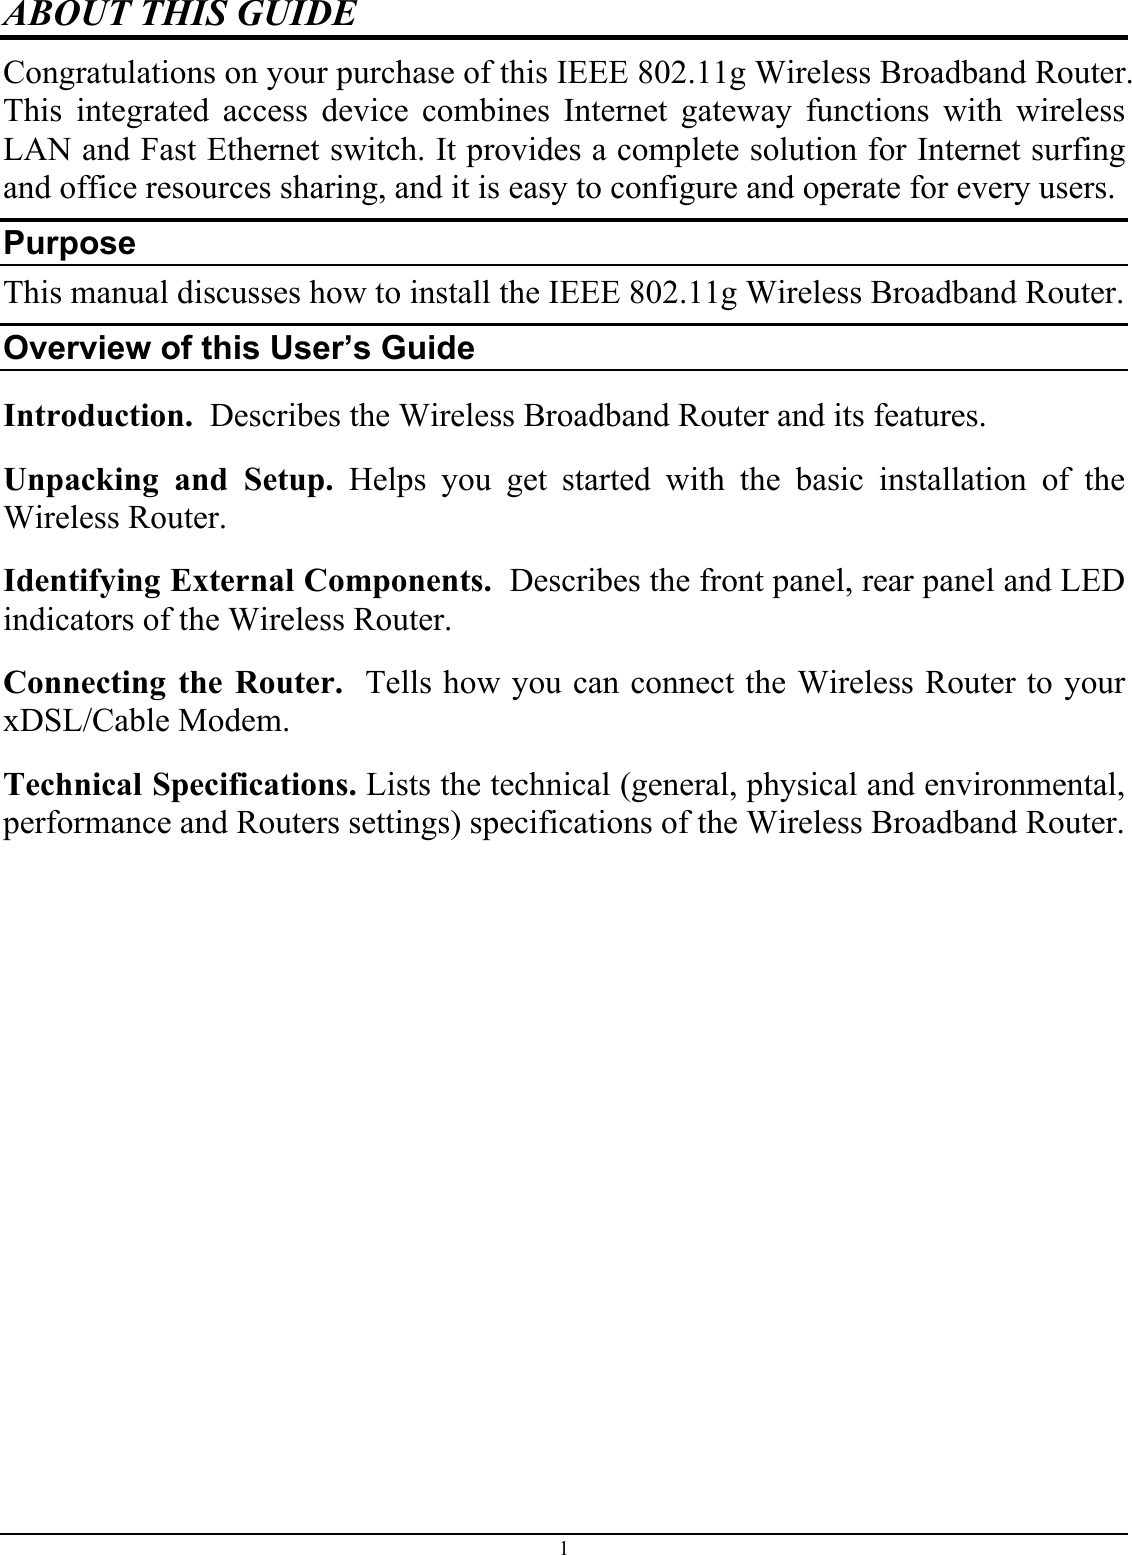 1 ABOUT THIS GUIDE Congratulations on your purchase of this IEEE 802.11g Wireless Broadband Router. This integrated access device combines Internet gateway functions with wireless LAN and Fast Ethernet switch. It provides a complete solution for Internet surfing and office resources sharing, and it is easy to configure and operate for every users. Purpose This manual discusses how to install the IEEE 802.11g Wireless Broadband Router.  Overview of this User’s Guide Introduction.  Describes the Wireless Broadband Router and its features. Unpacking and Setup. Helps you get started with the basic installation of the Wireless Router. Identifying External Components.  Describes the front panel, rear panel and LED indicators of the Wireless Router. Connecting the Router.  Tells how you can connect the Wireless Router to your xDSL/Cable Modem. Technical Specifications. Lists the technical (general, physical and environmental, performance and Routers settings) specifications of the Wireless Broadband Router. 